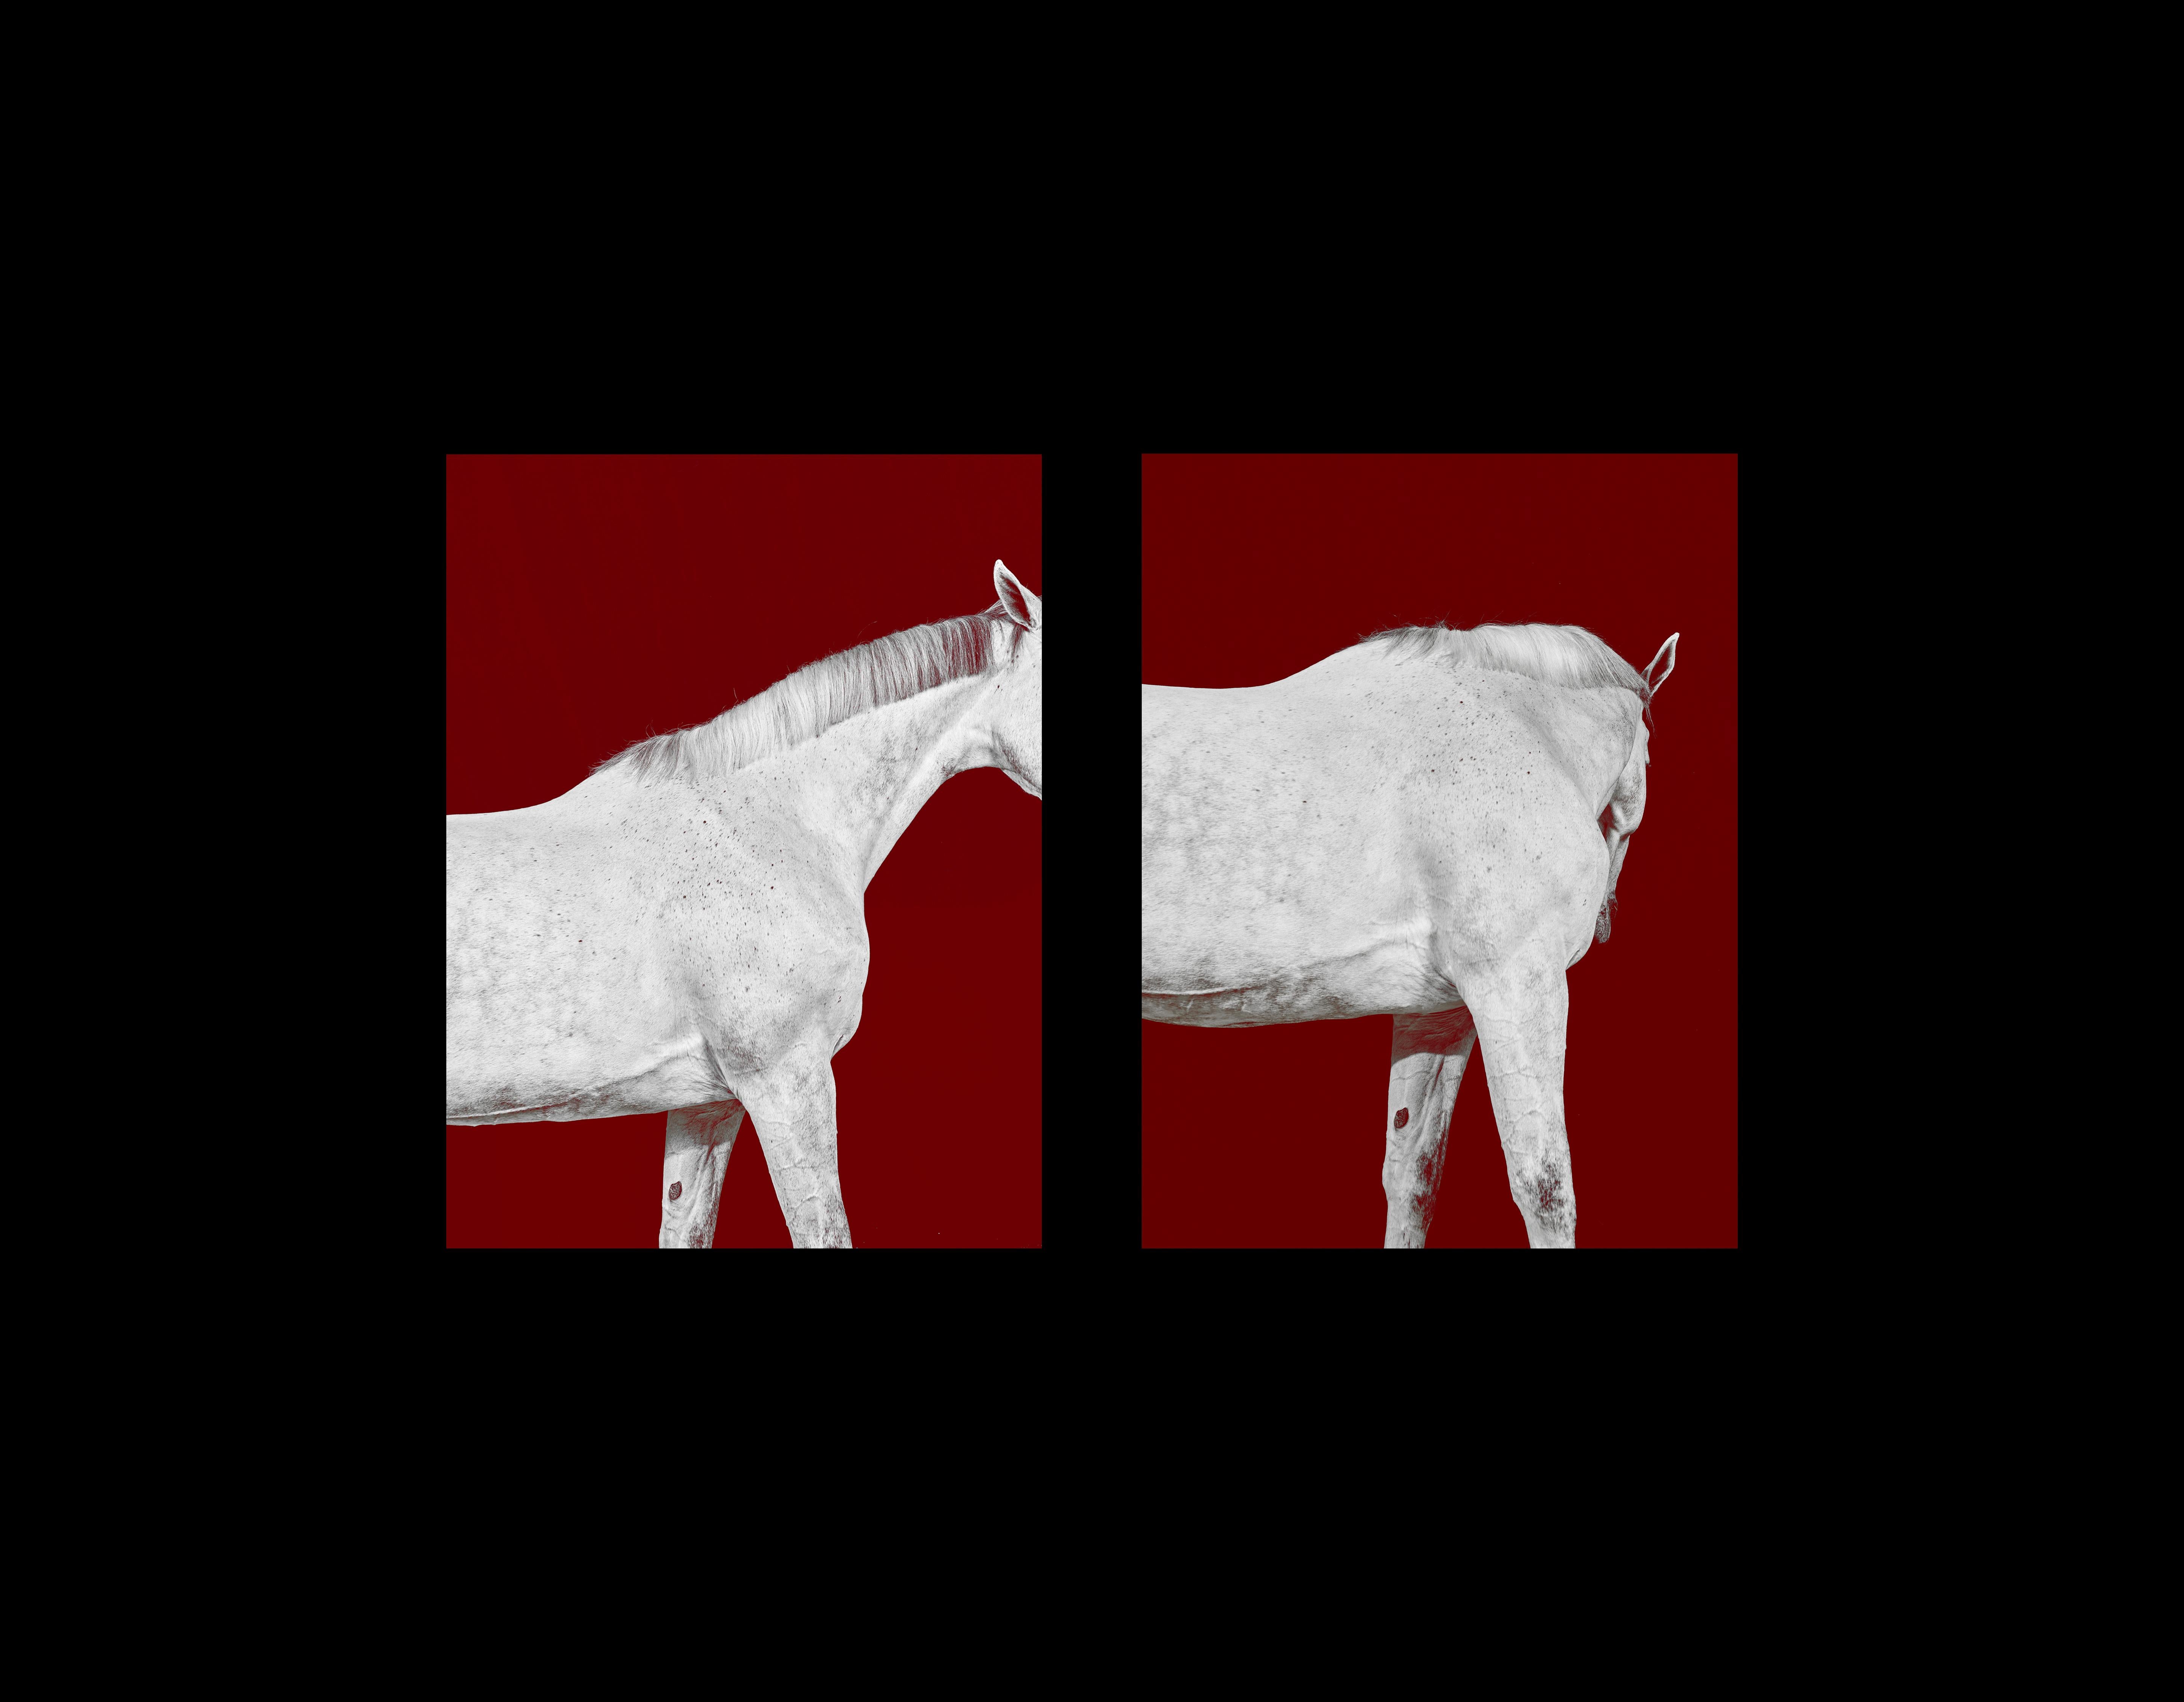 Juan Lamarca Abstract Photograph - Tixie on Red III - Full Color Limited Edition Horse Portrait 2016